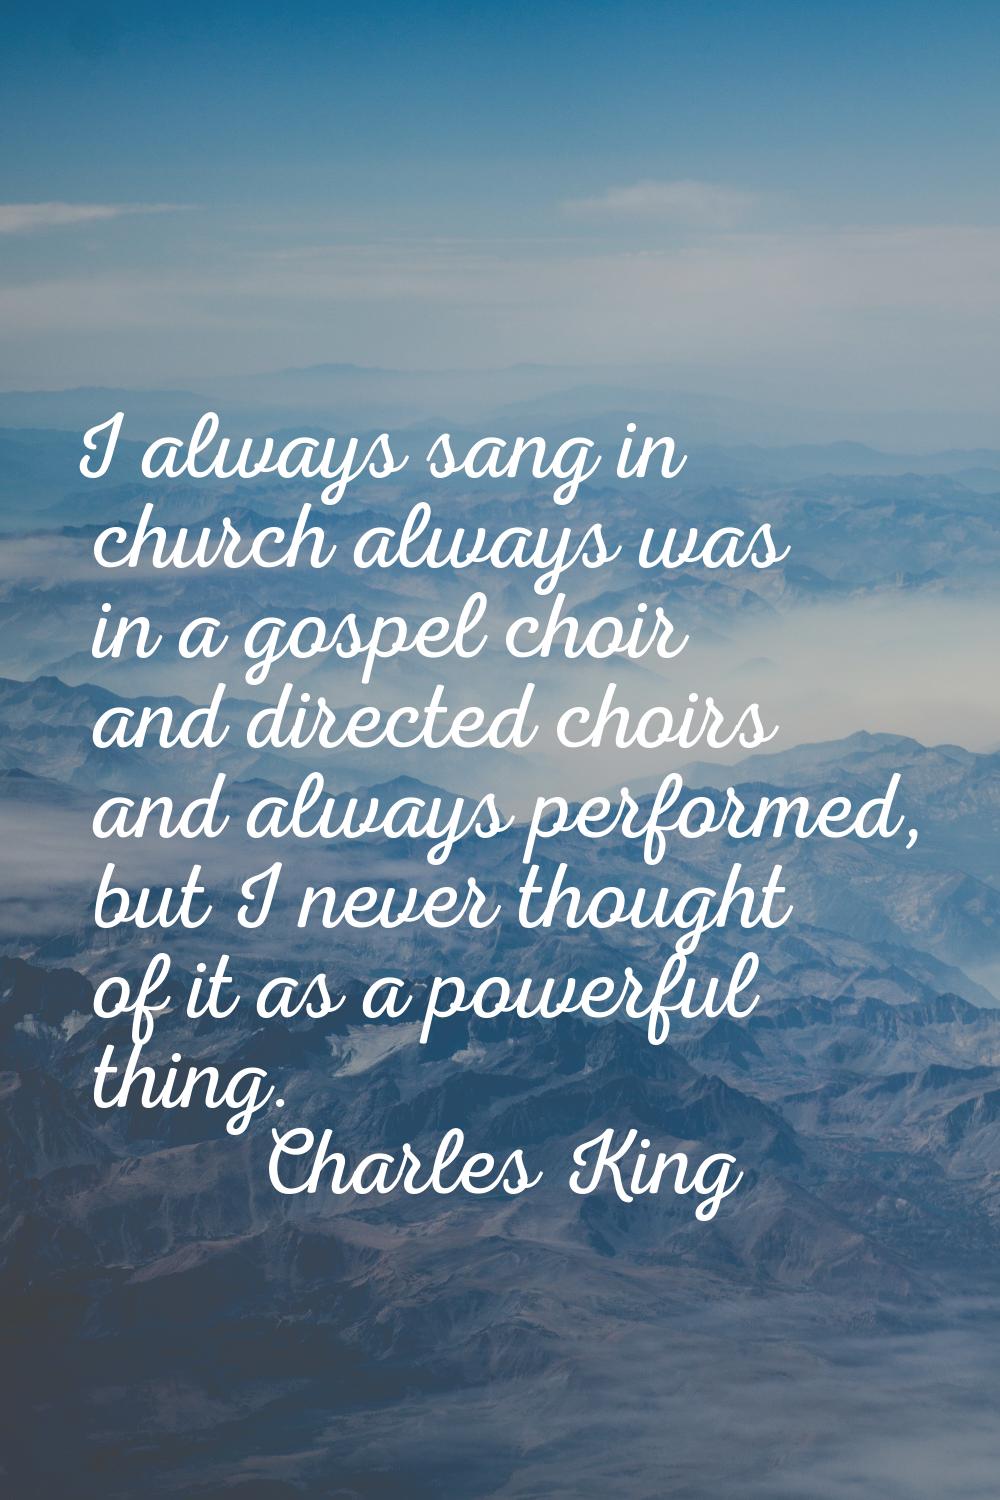 I always sang in church always was in a gospel choir and directed choirs and always performed, but 